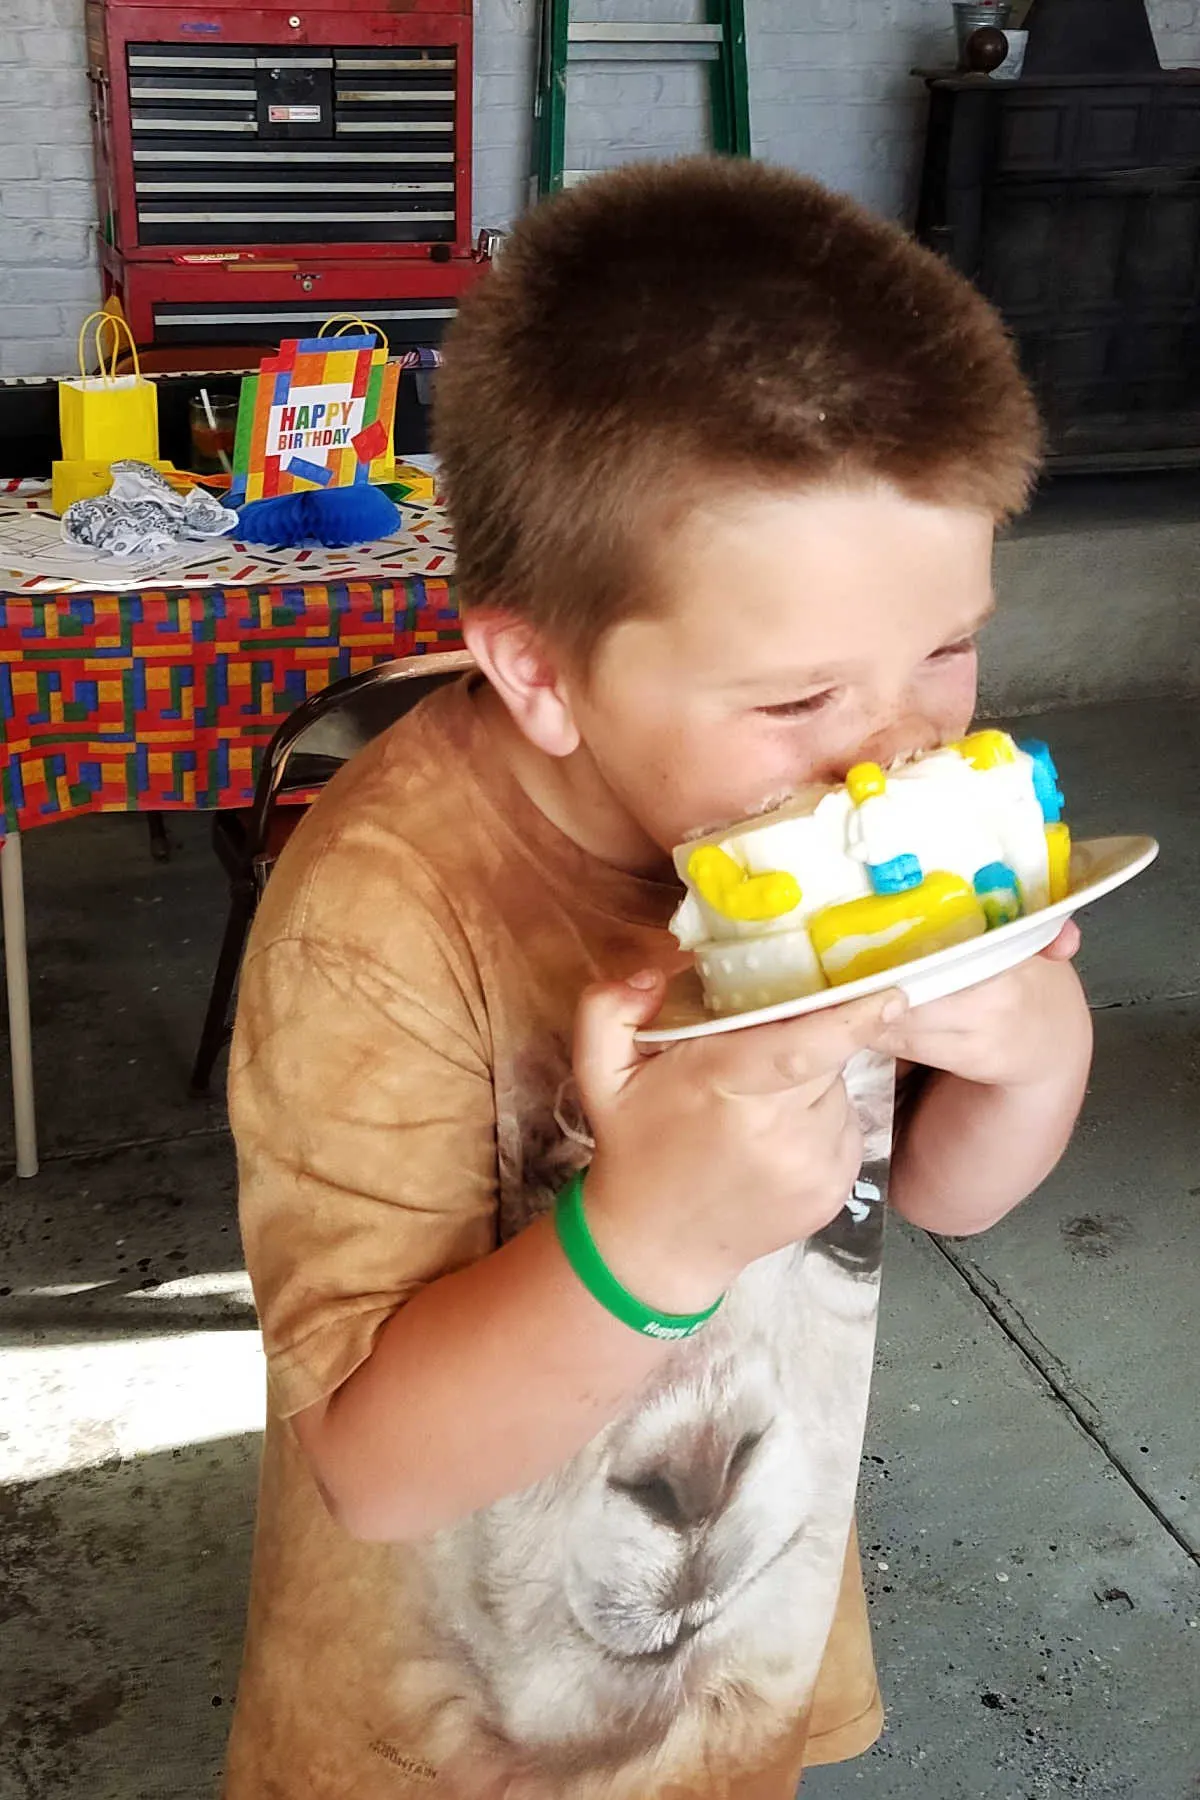 Boy putting his face into a cake.